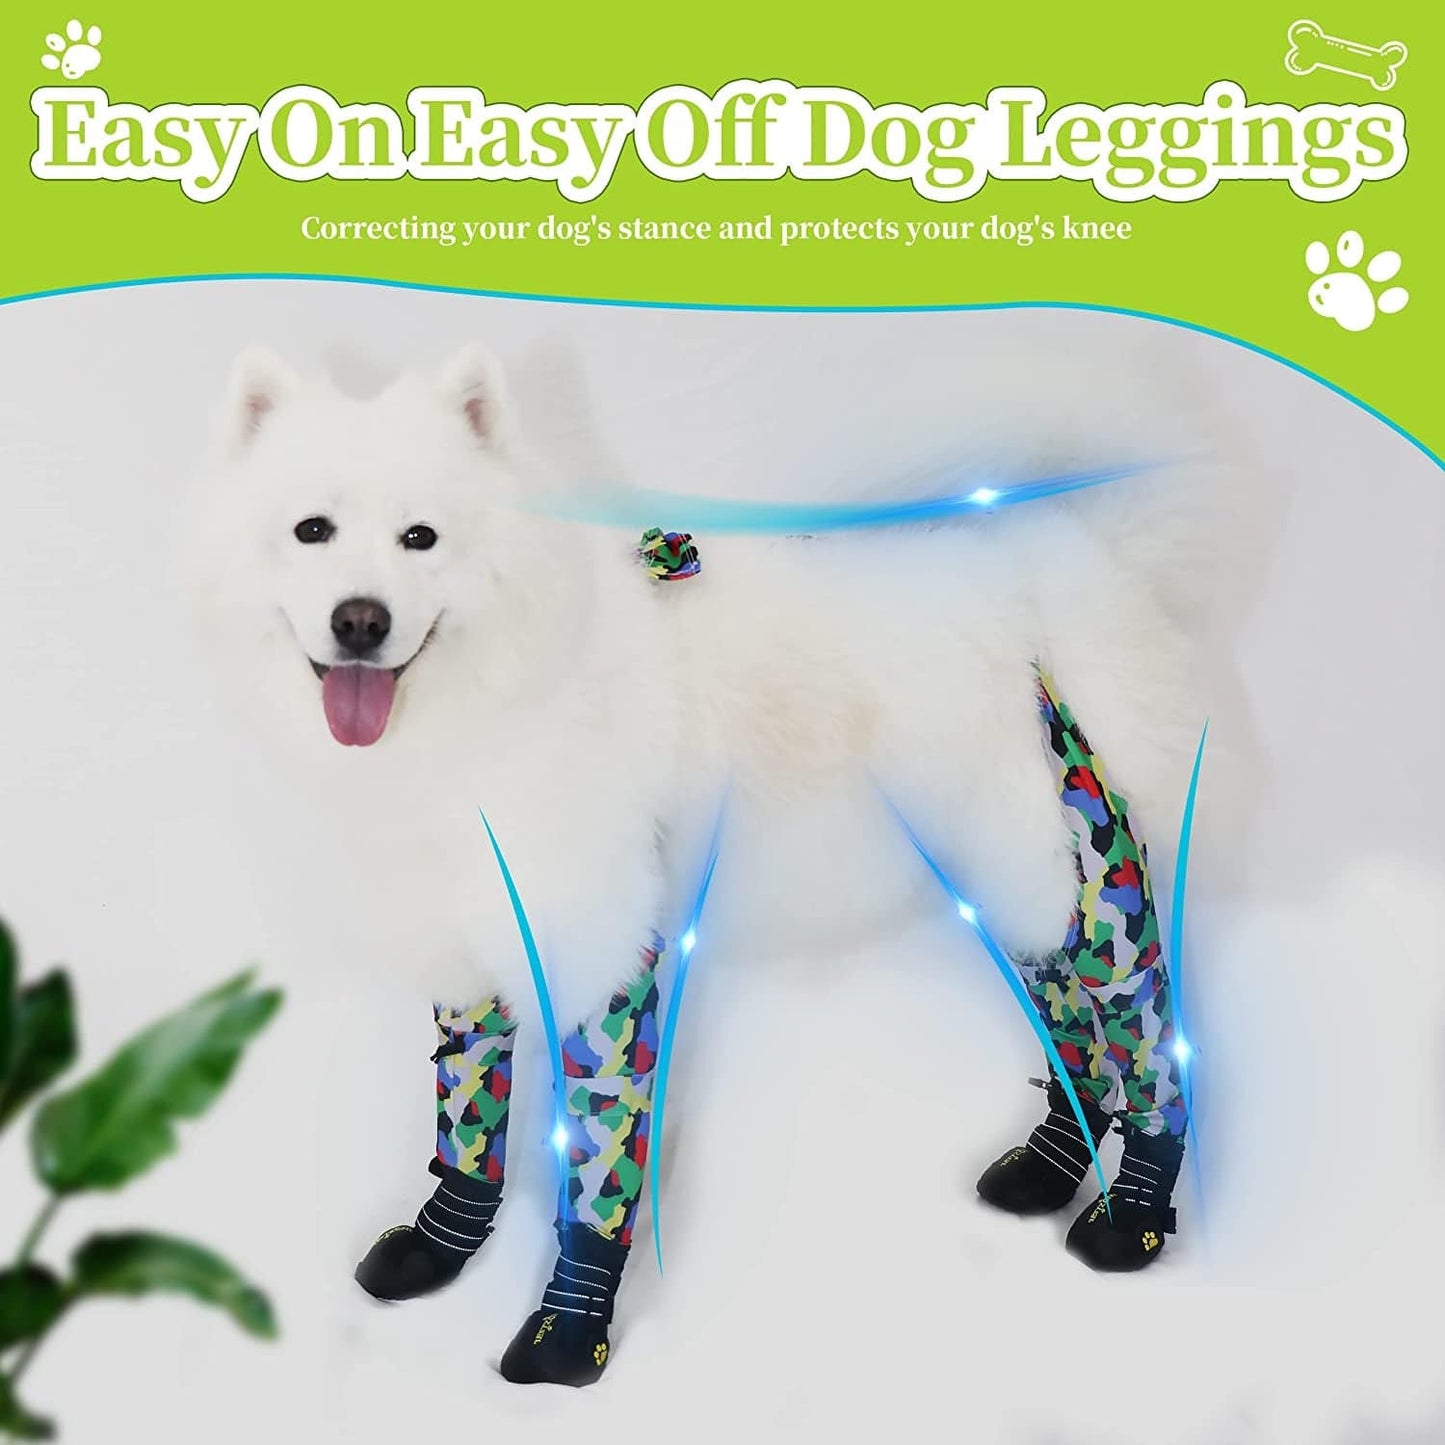 How to Choose the Best Dog Leggings